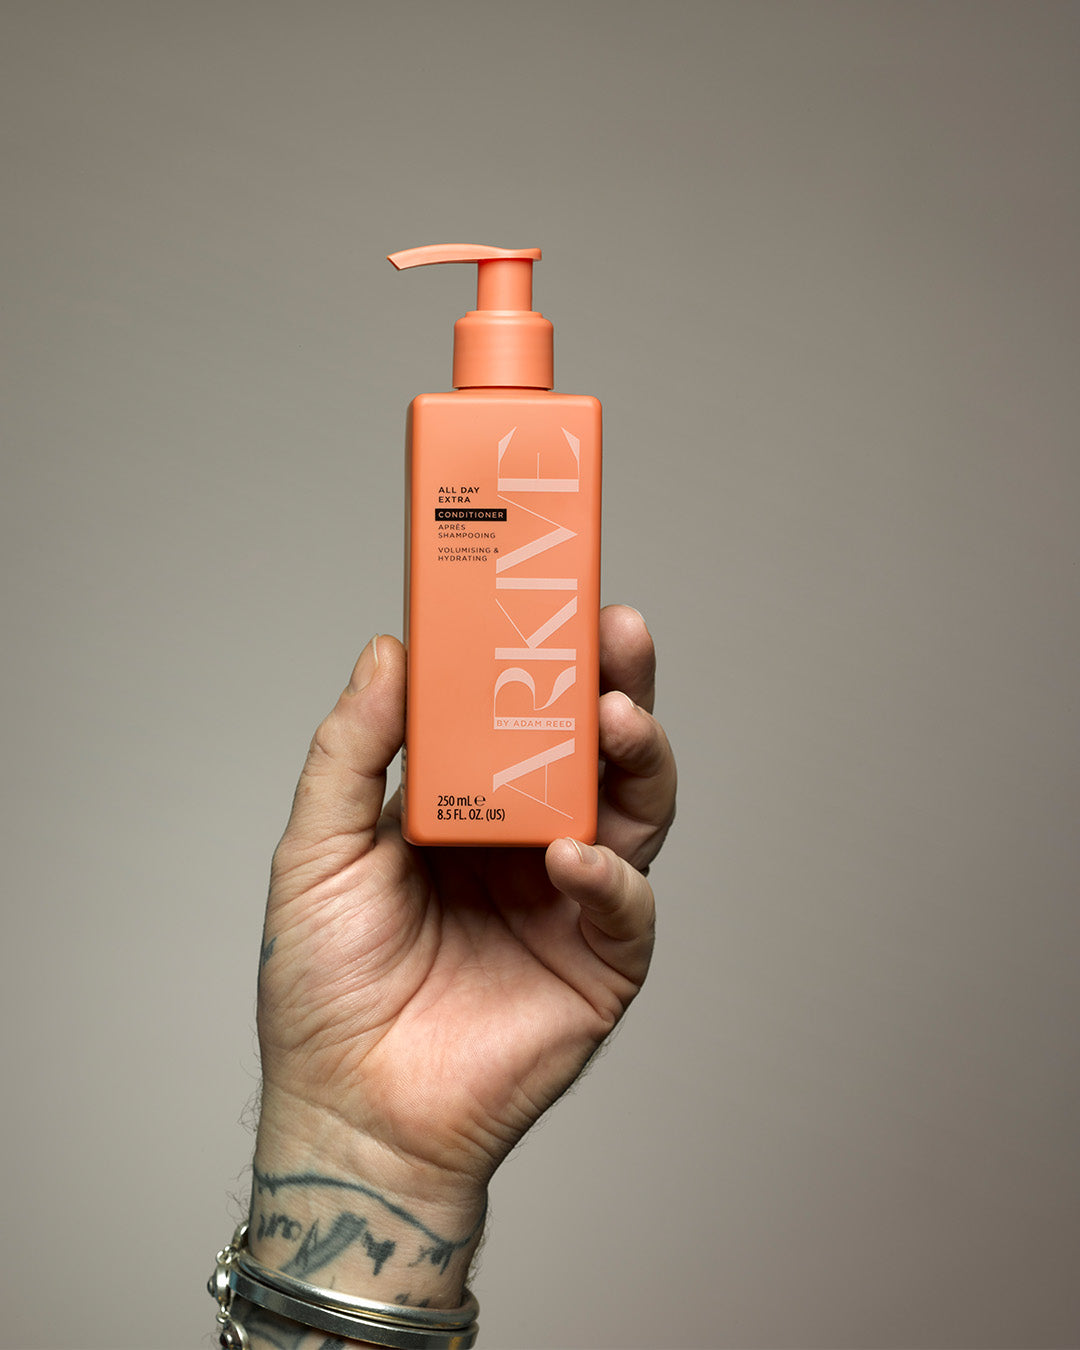 A bottle of Arkive's innovative gel cream conditioner being held up in one hand